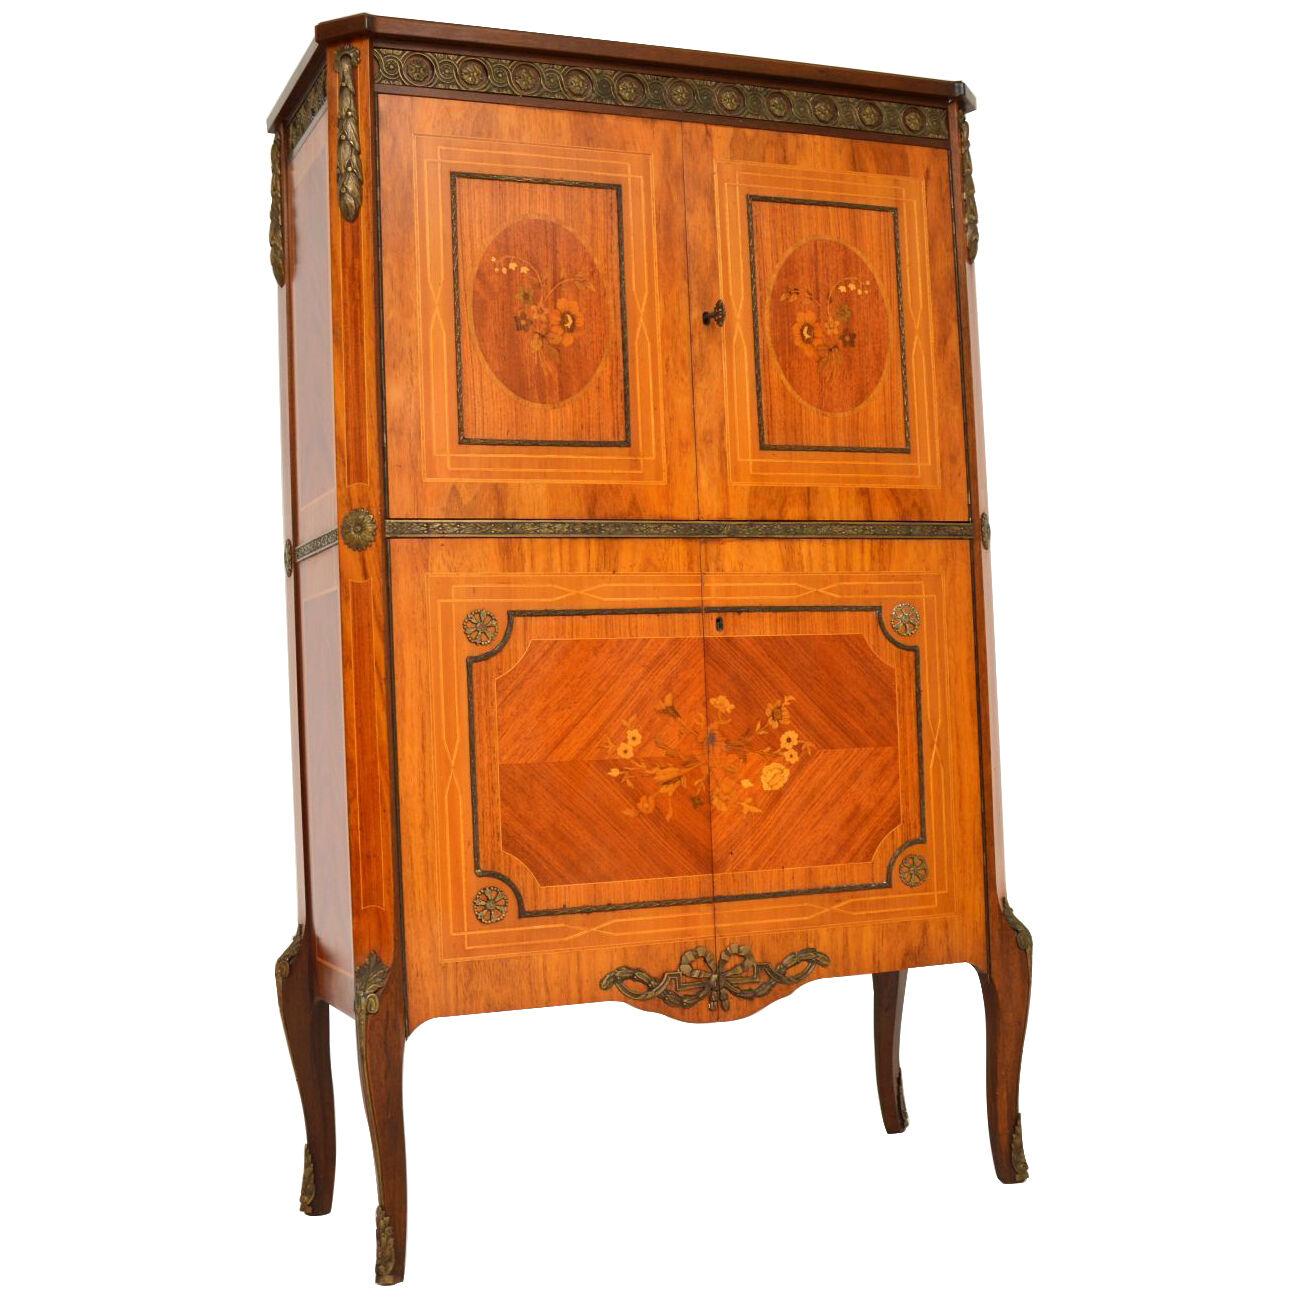 Antique French Inlaid Marquetry Drinks Cabinet